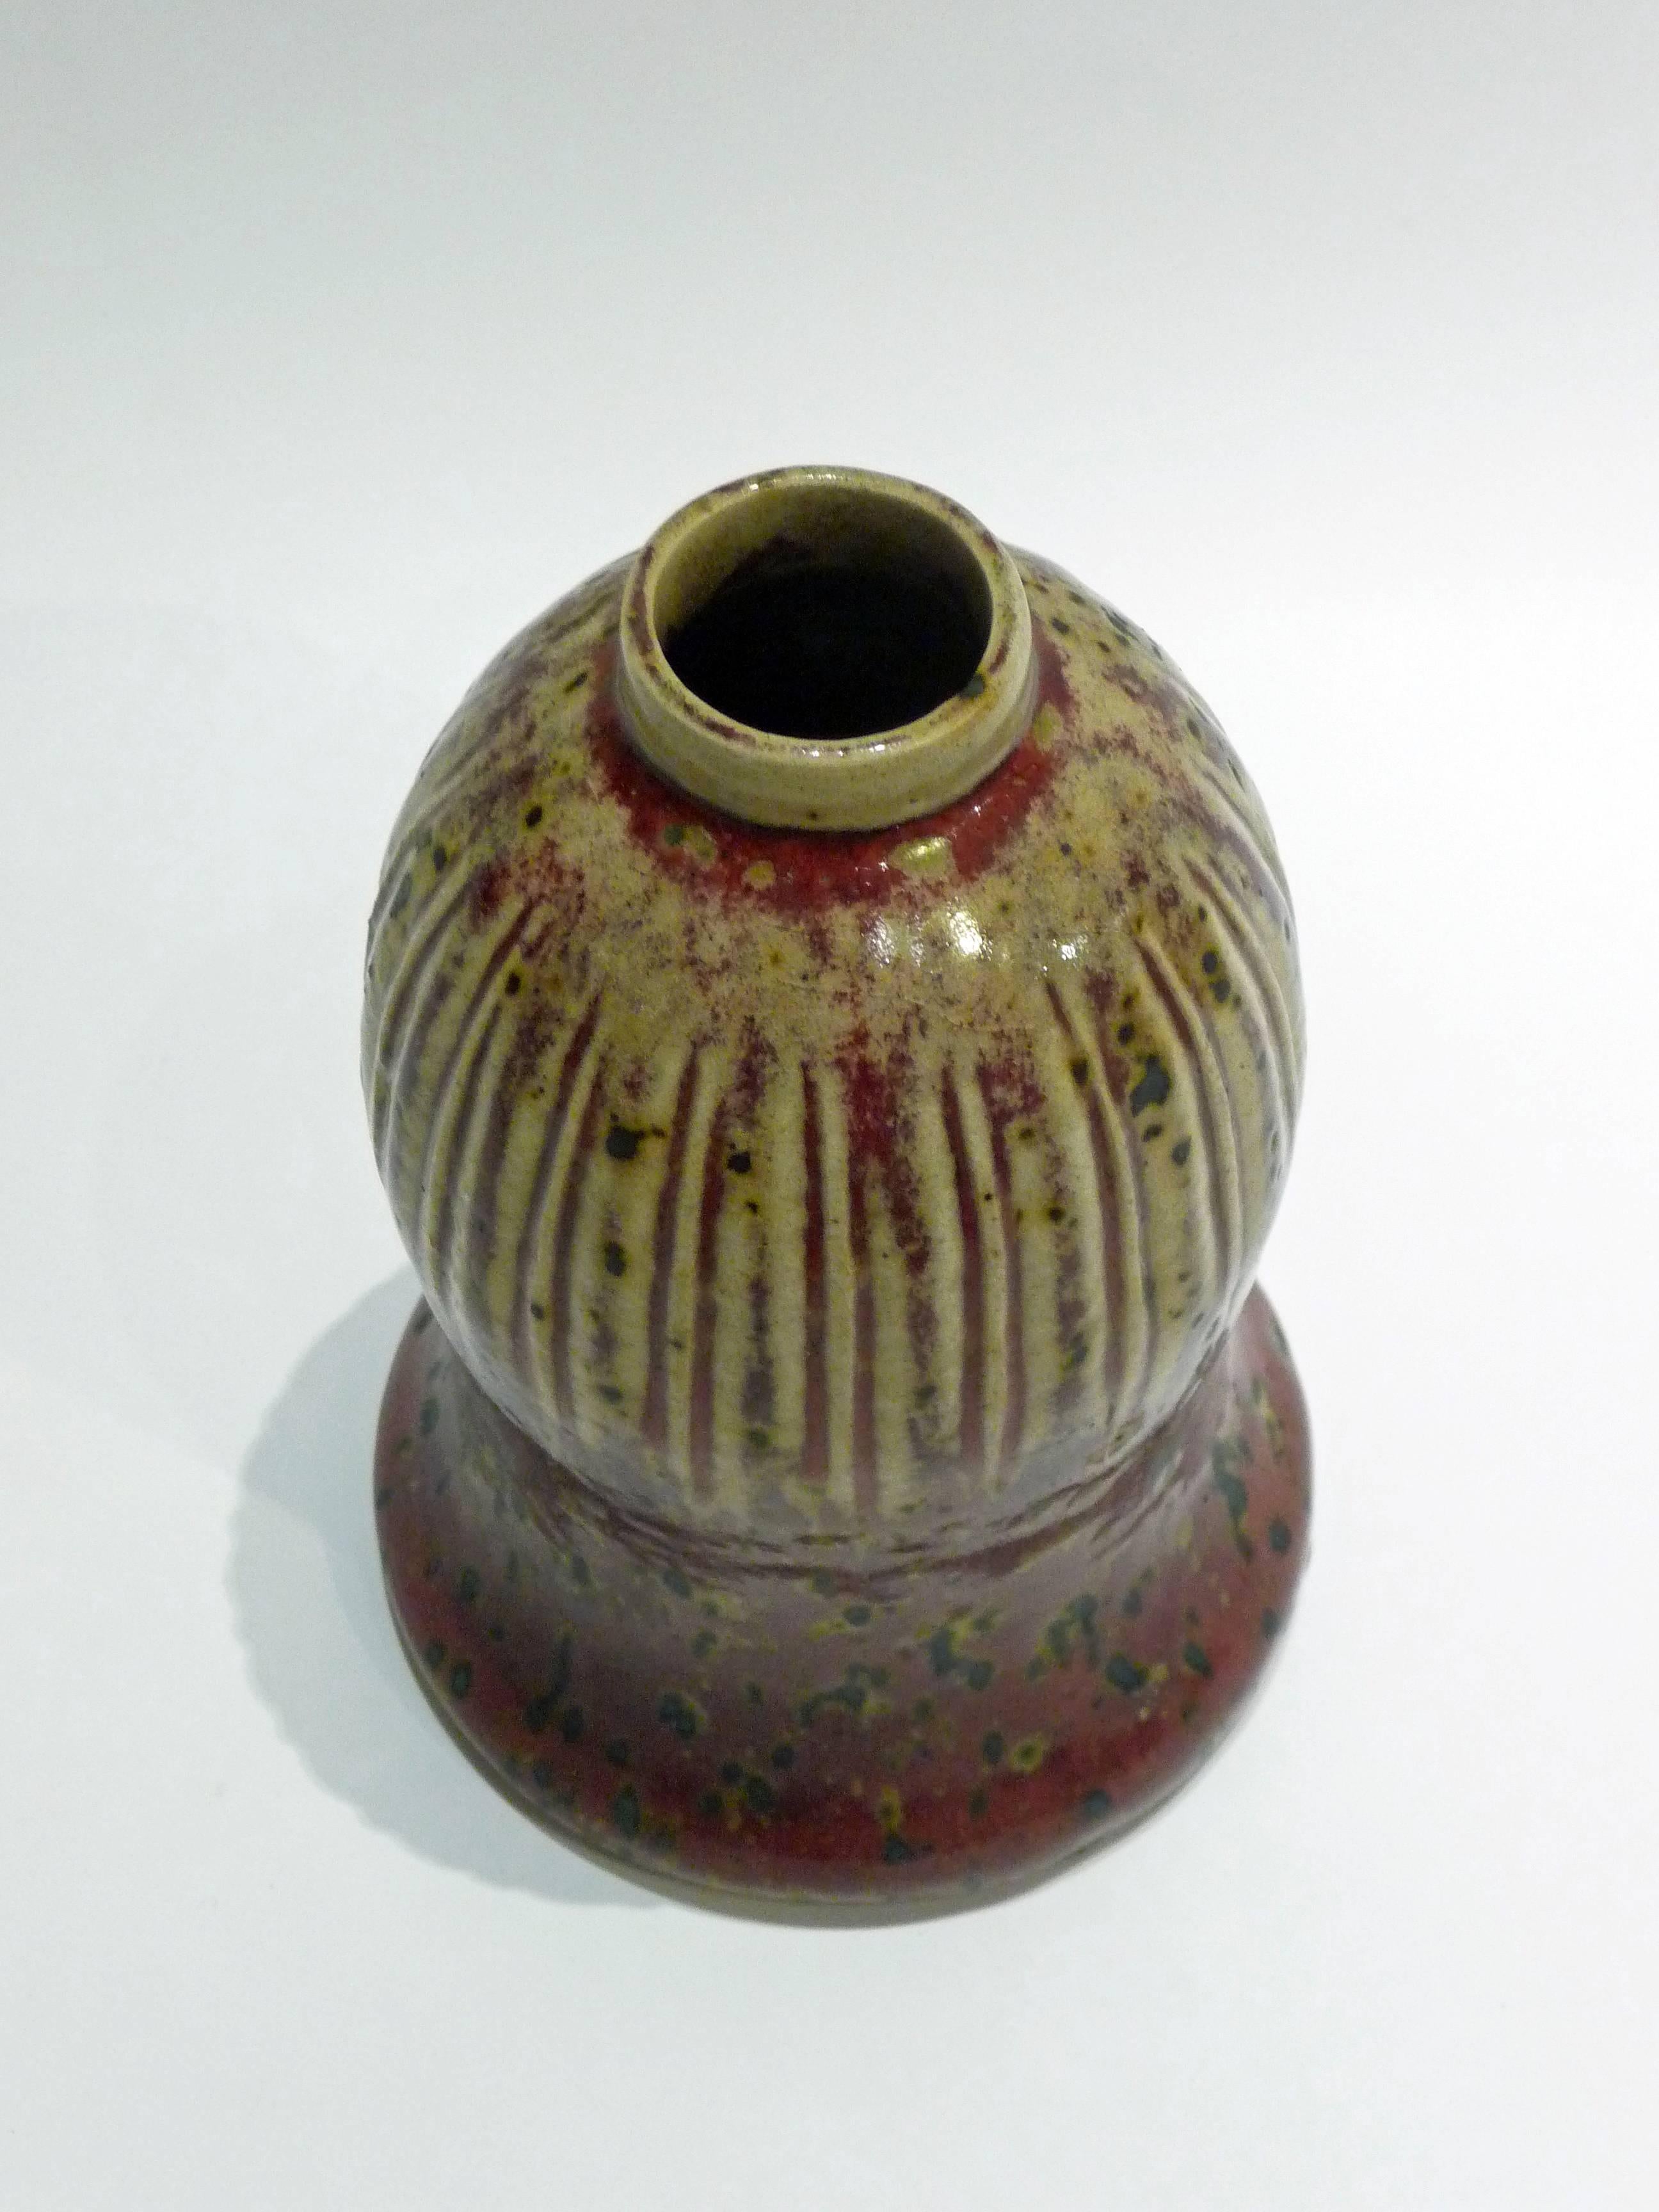 Pierre-Adrien Dalpayrat
A bell shaped vase
Grès with a sang-de-boeuf, green and beige glazes.

 